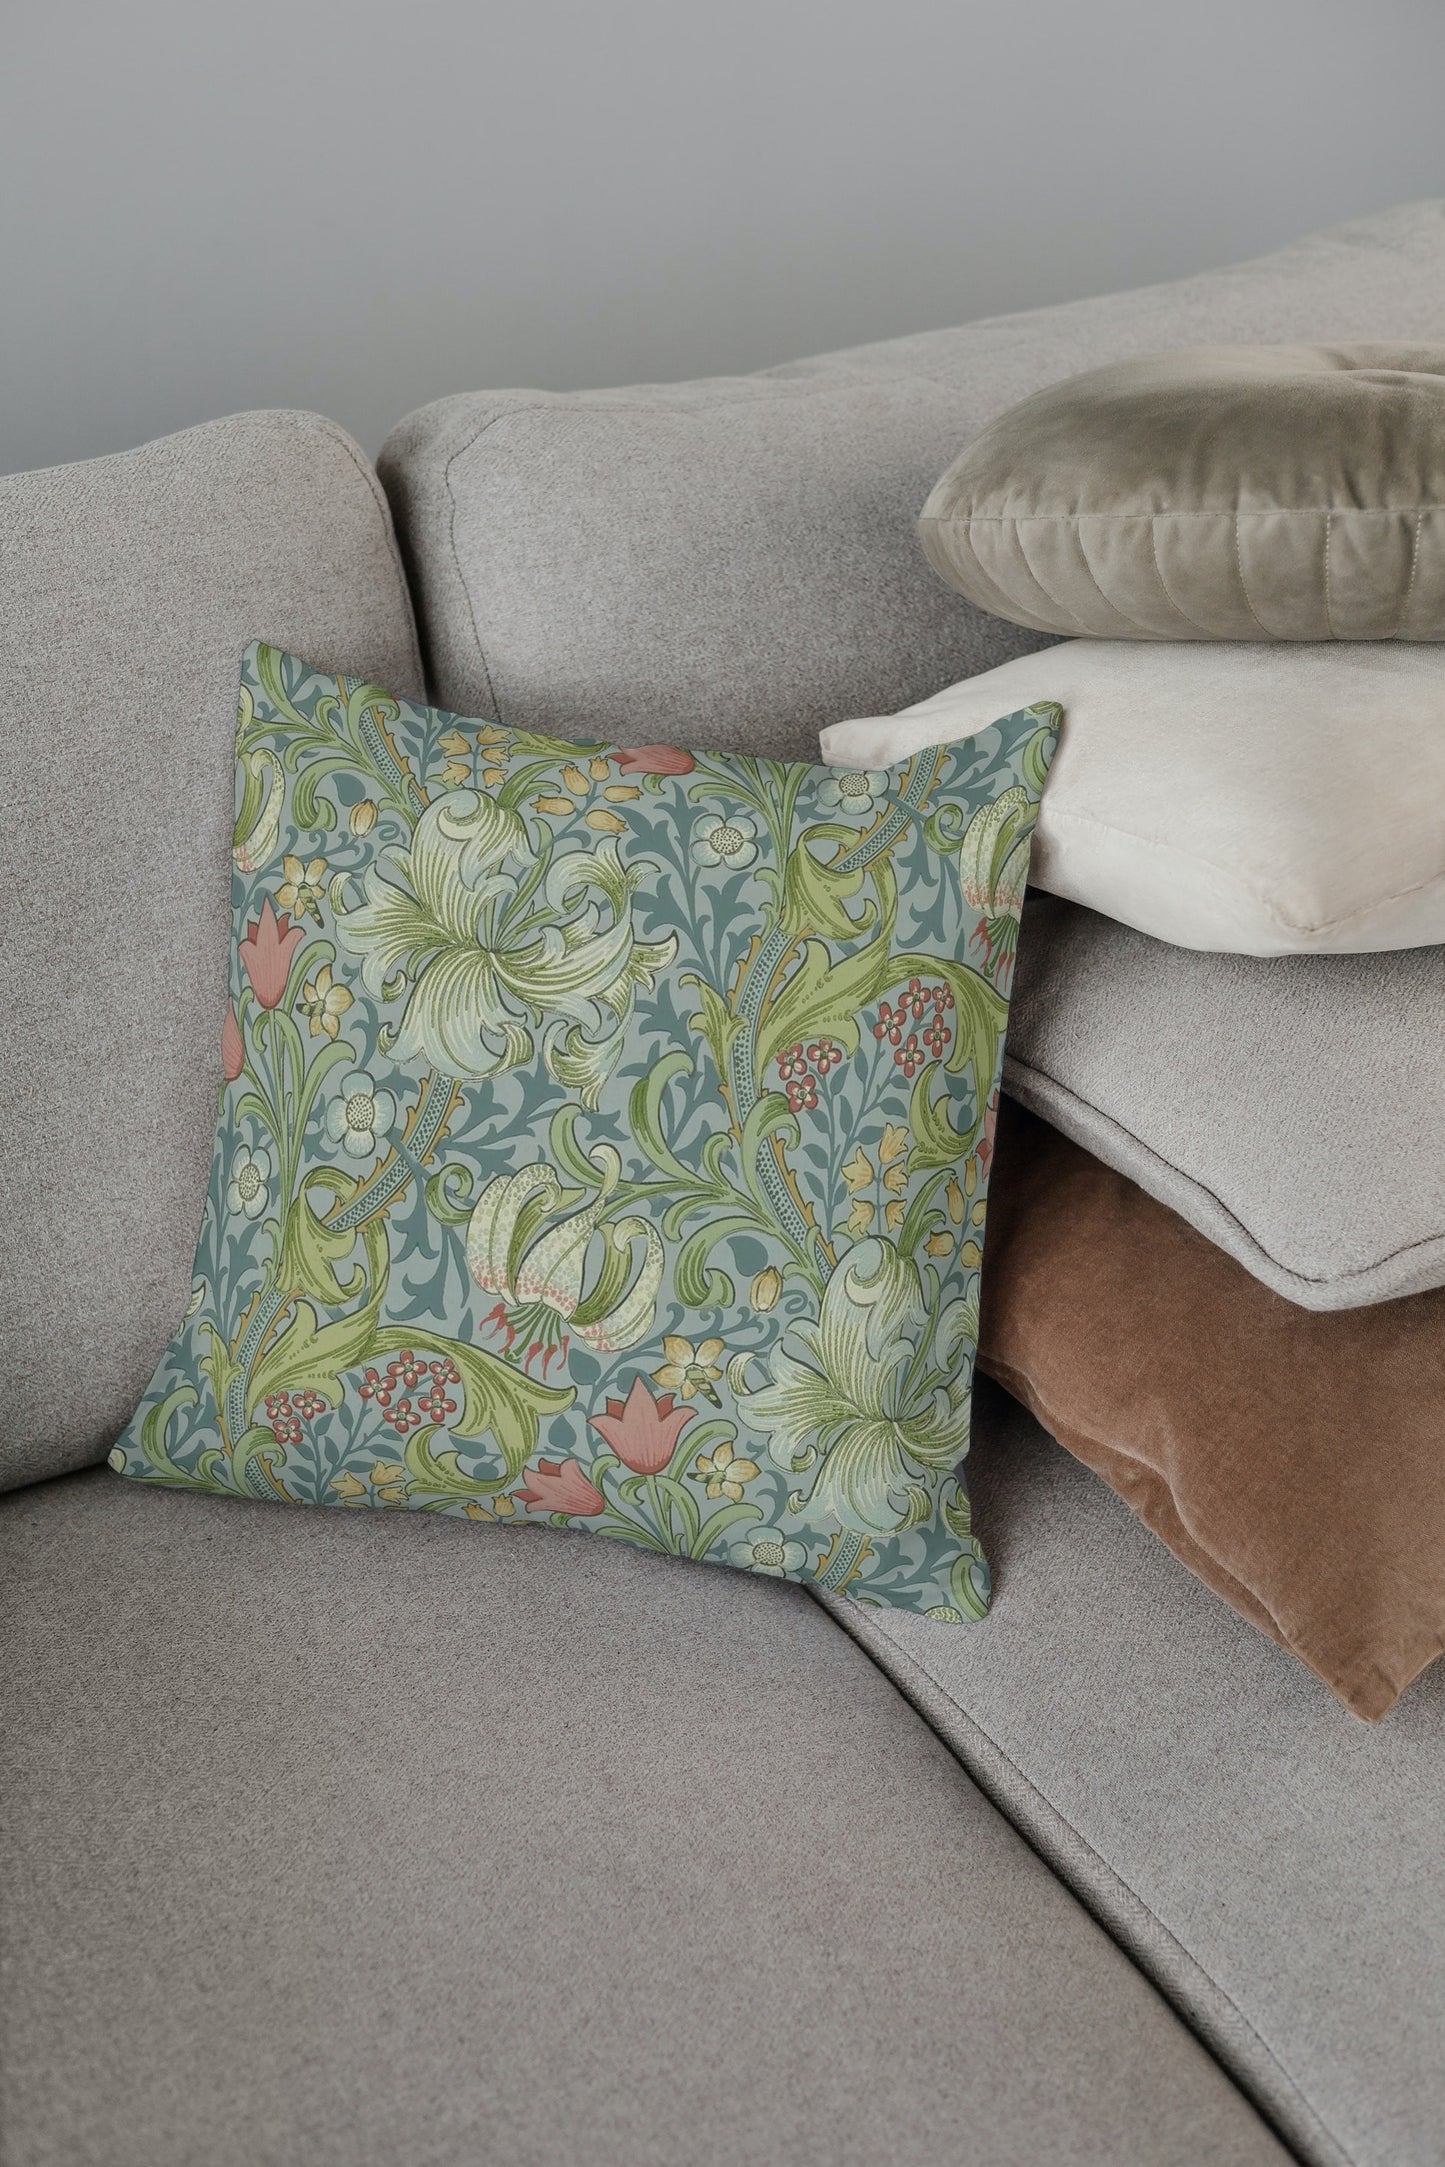 Golden Lily Outdoor Pillow William Morris Mineral Blue